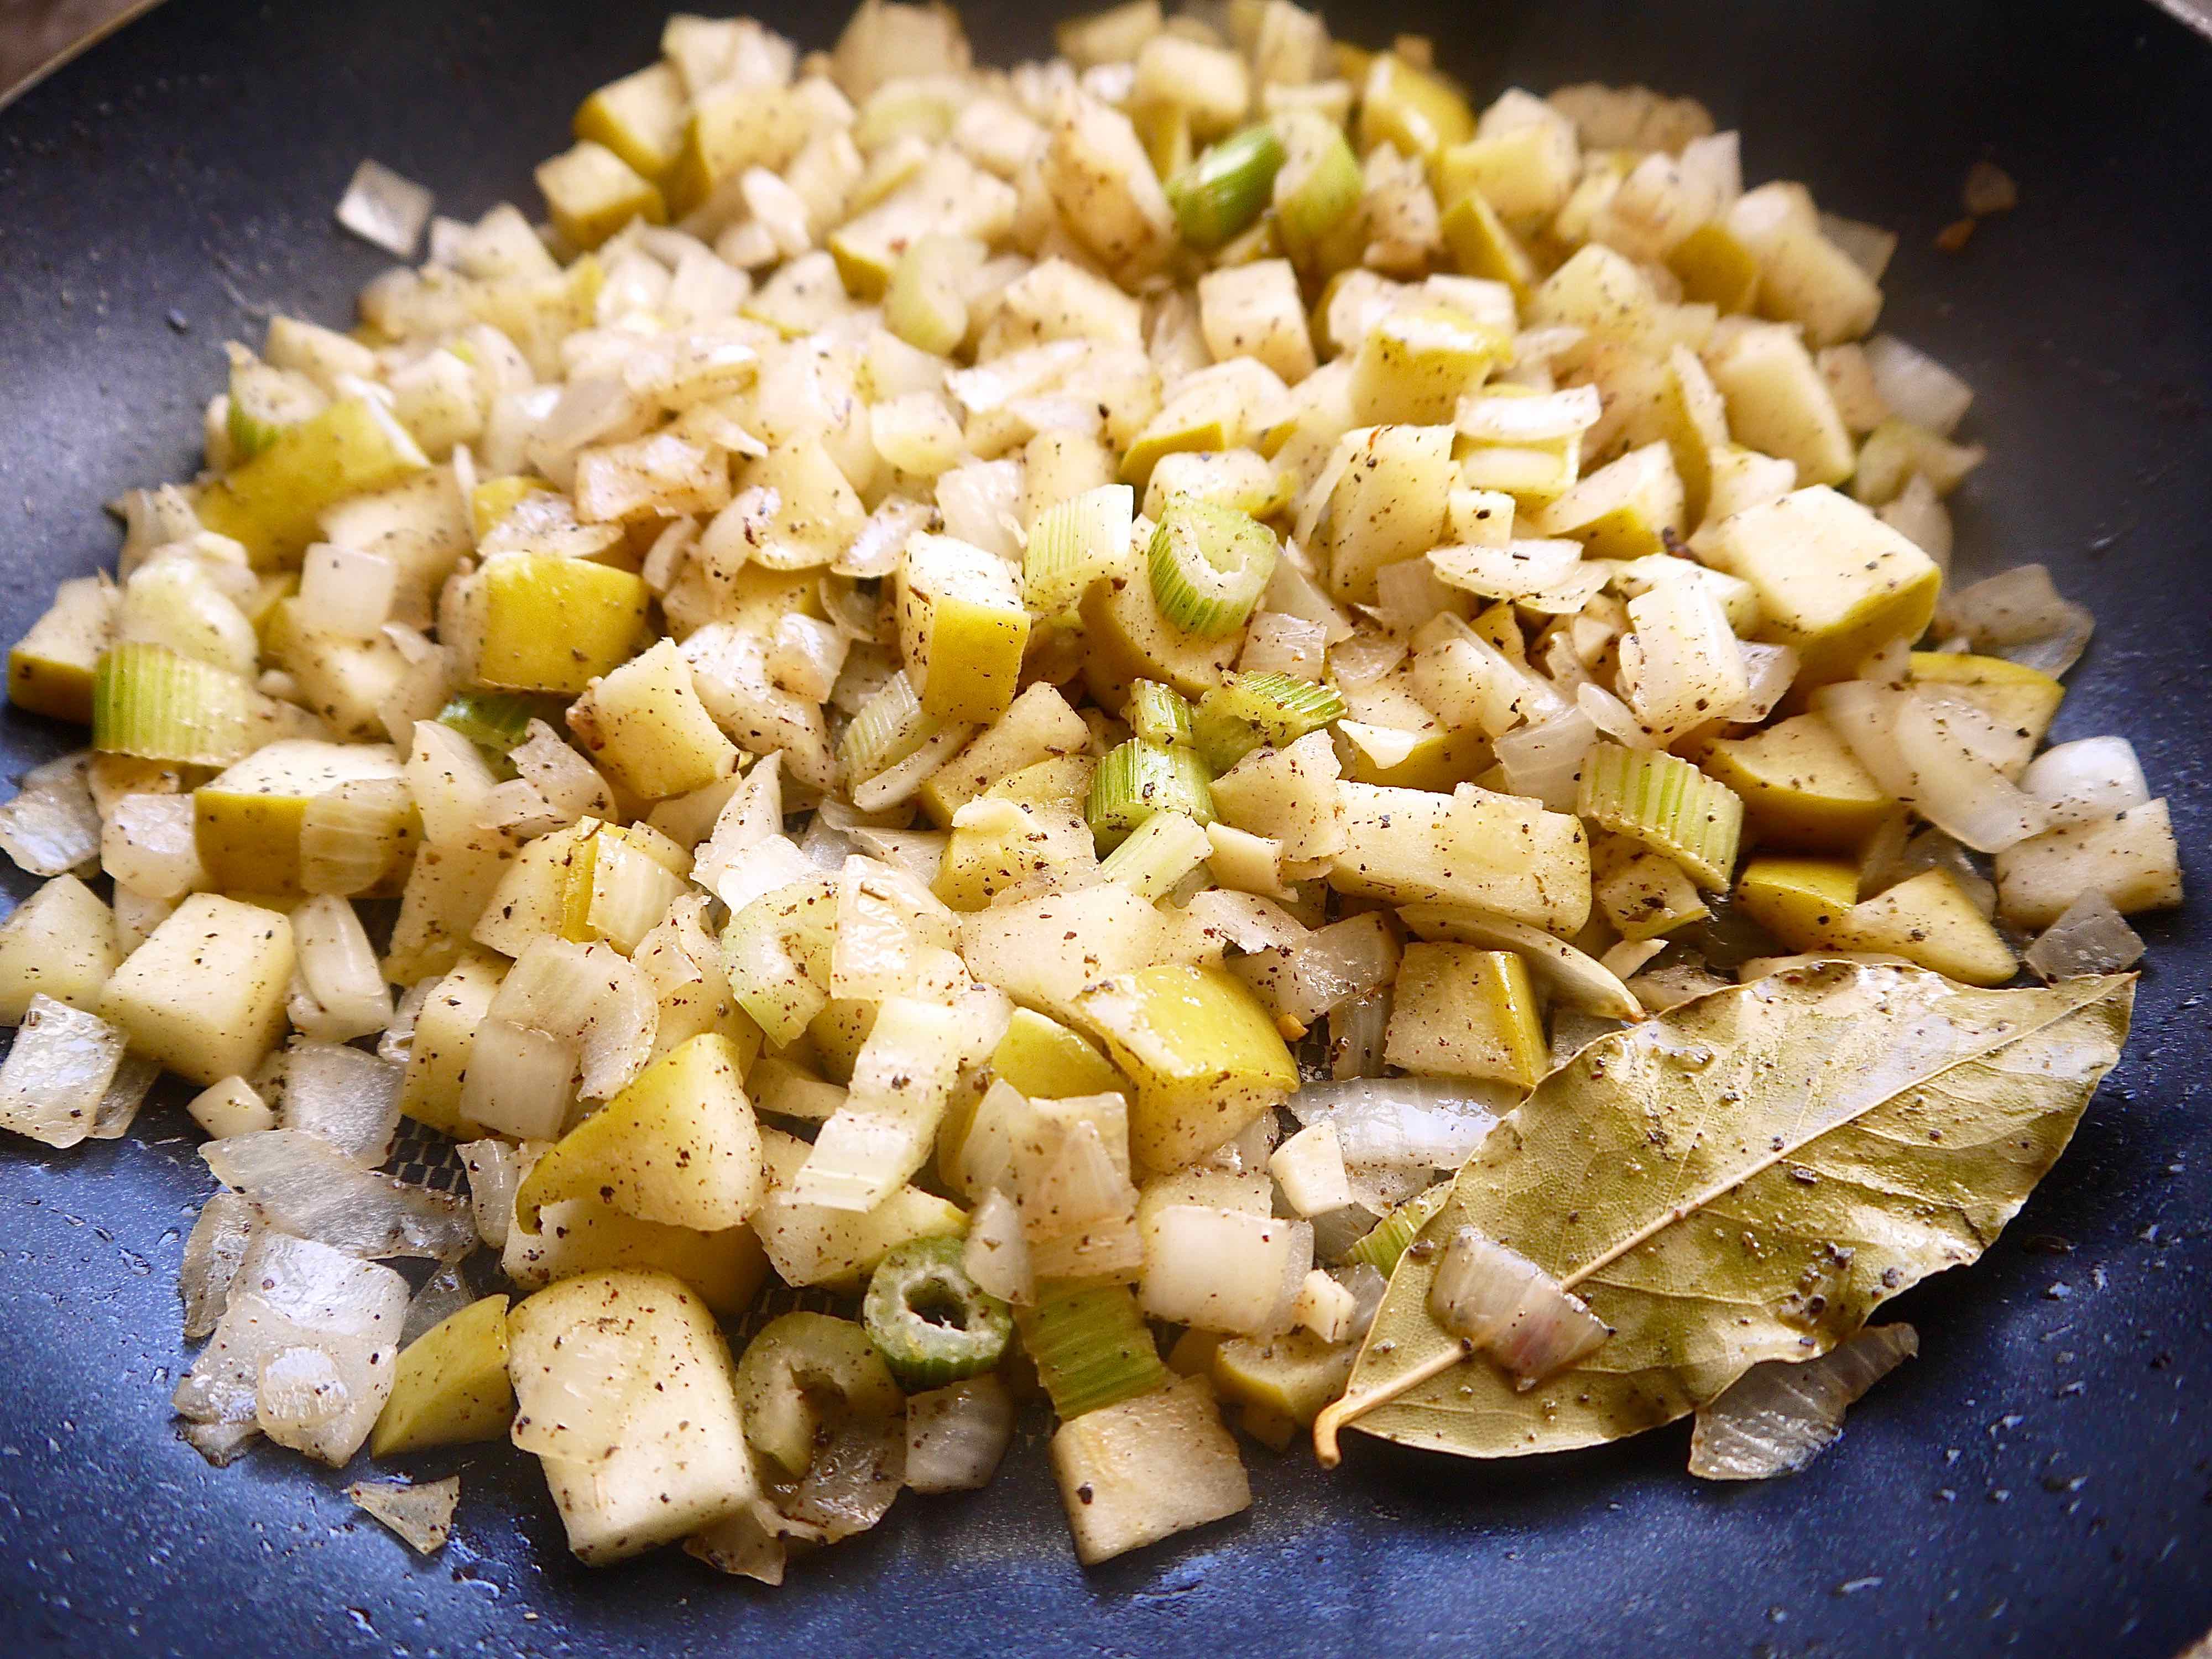 Cooked fennel and apples in a pan.